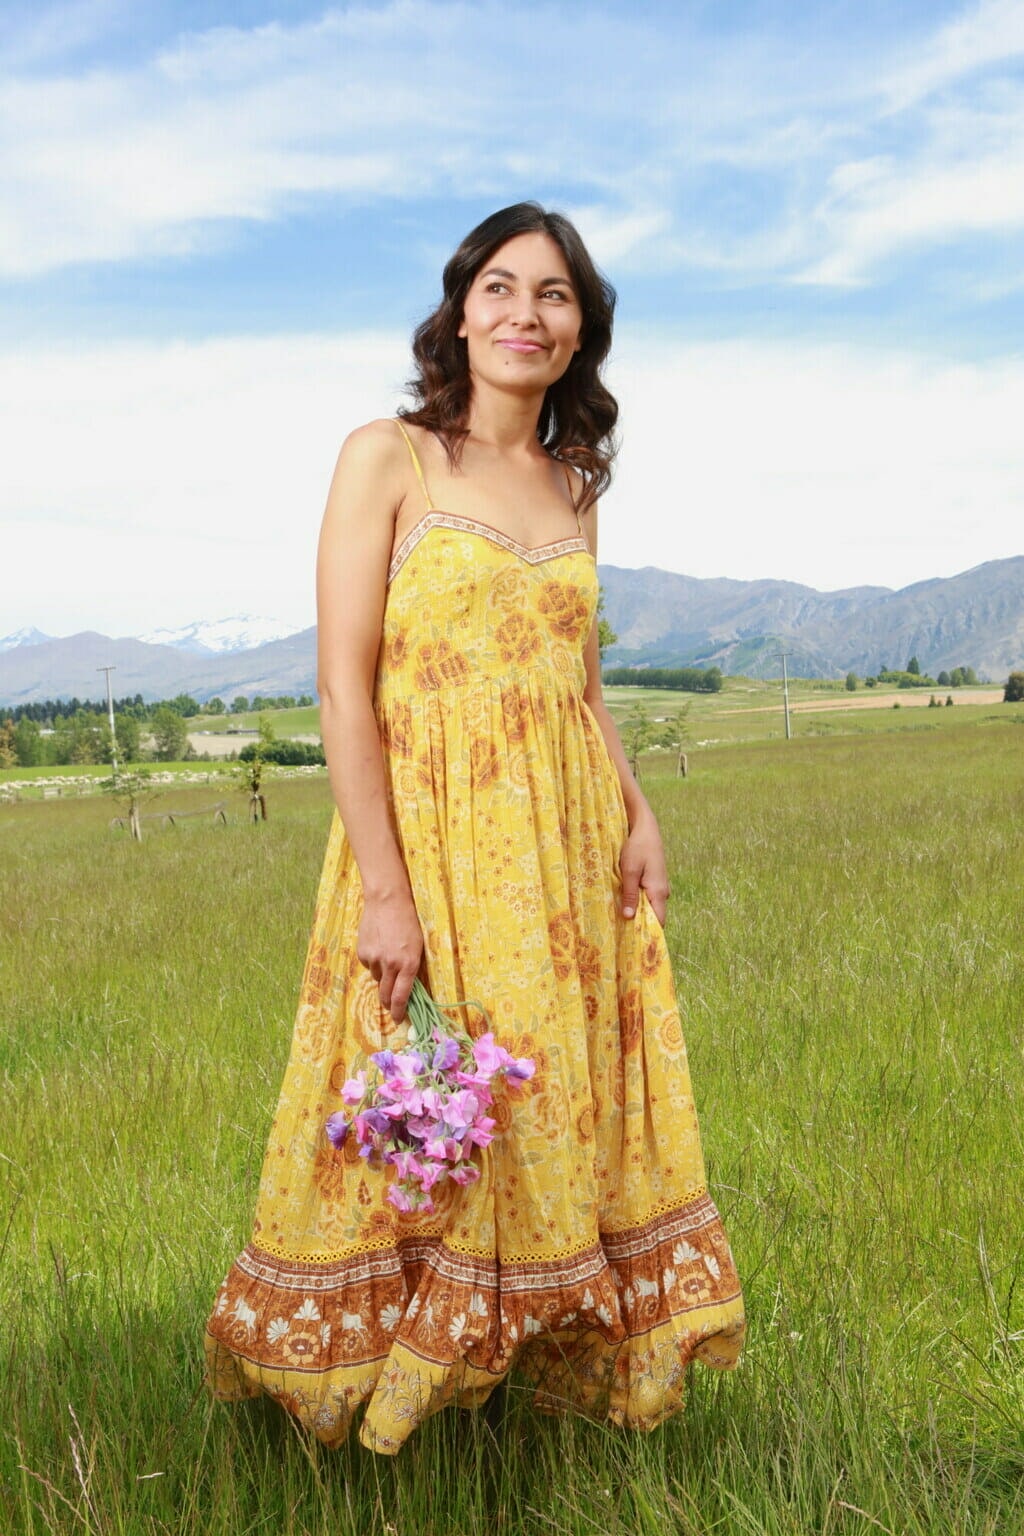 Nadia Lim in yellow dress holding pink flowers